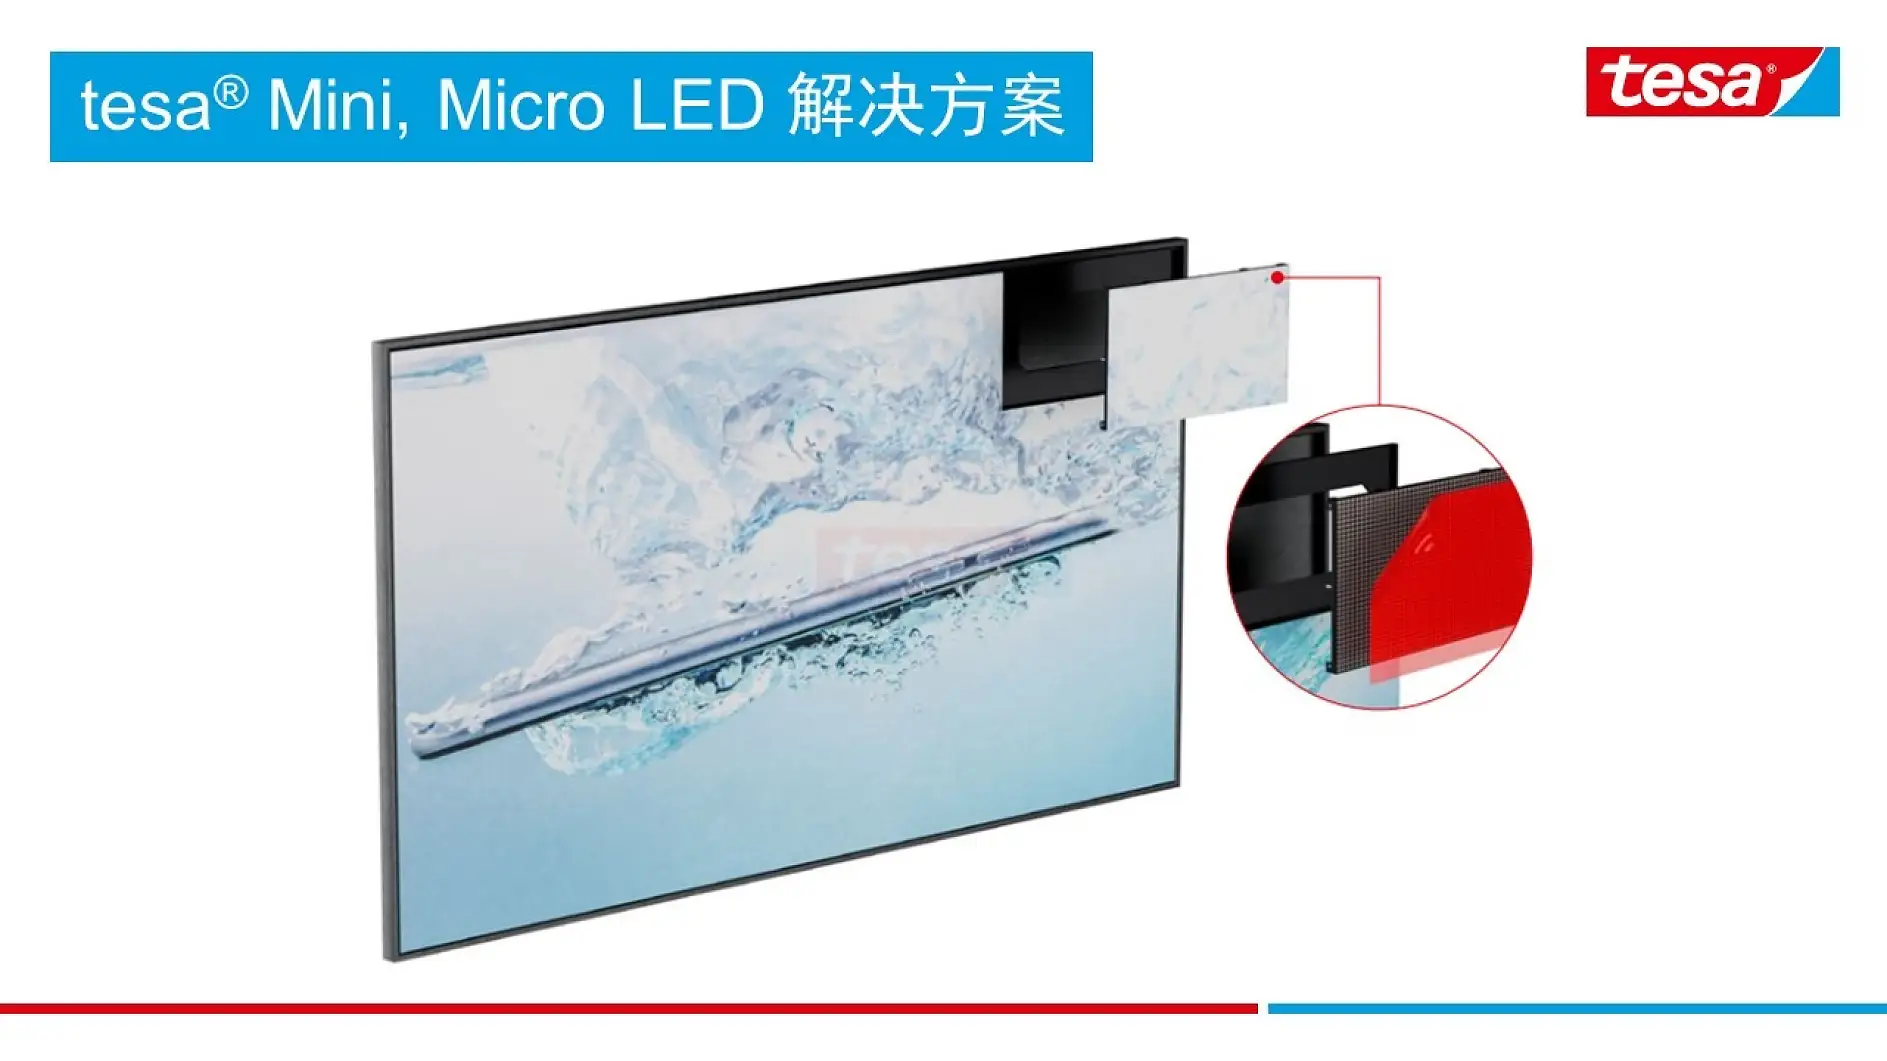 Solution for Mini,Micro LED direct view display